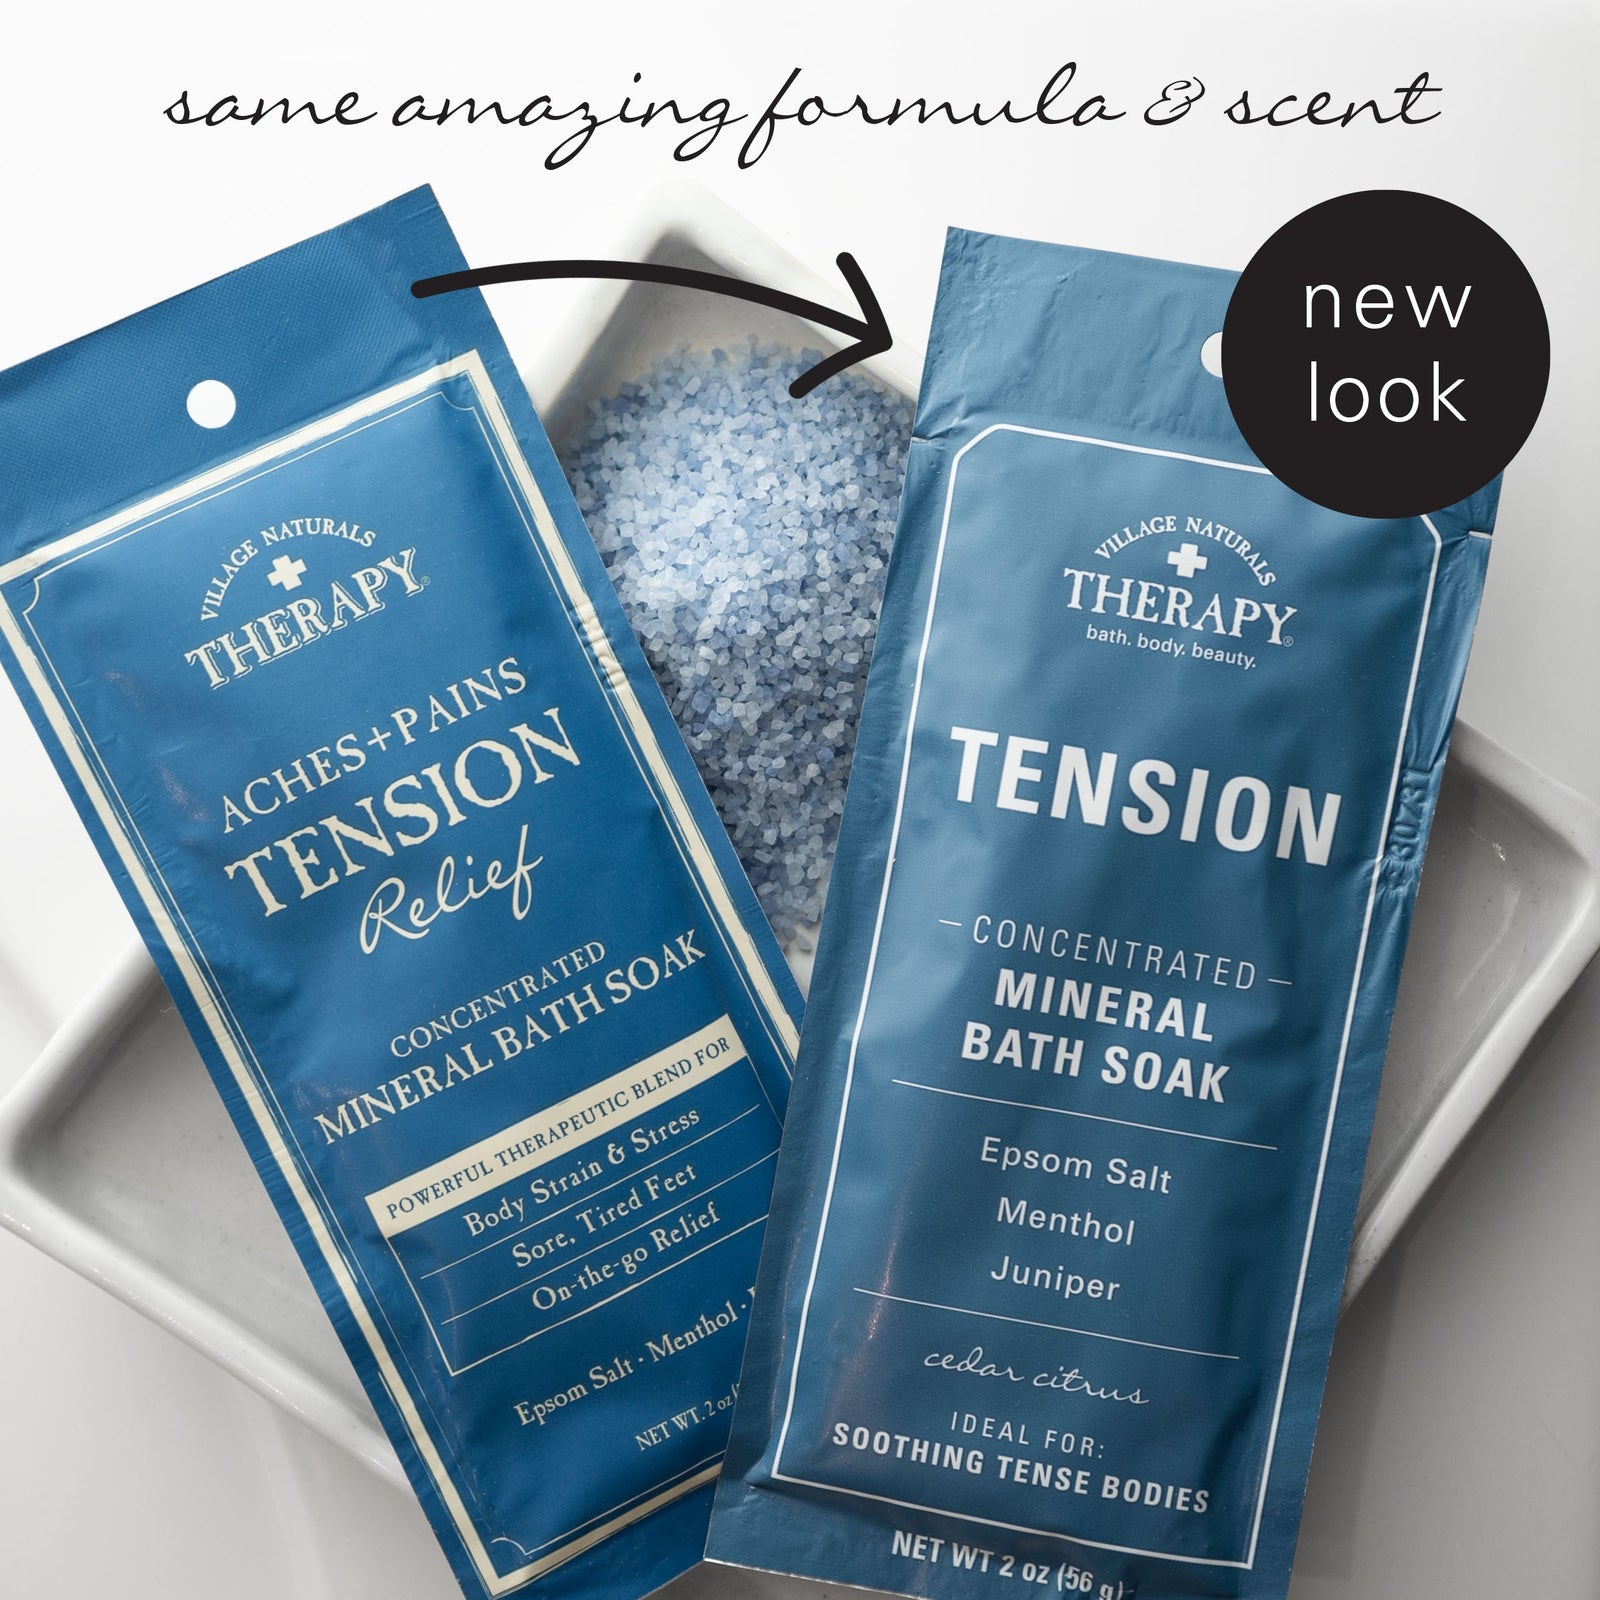 Village Naturals Therapy Tension Concentrated Mineral Bath Soak